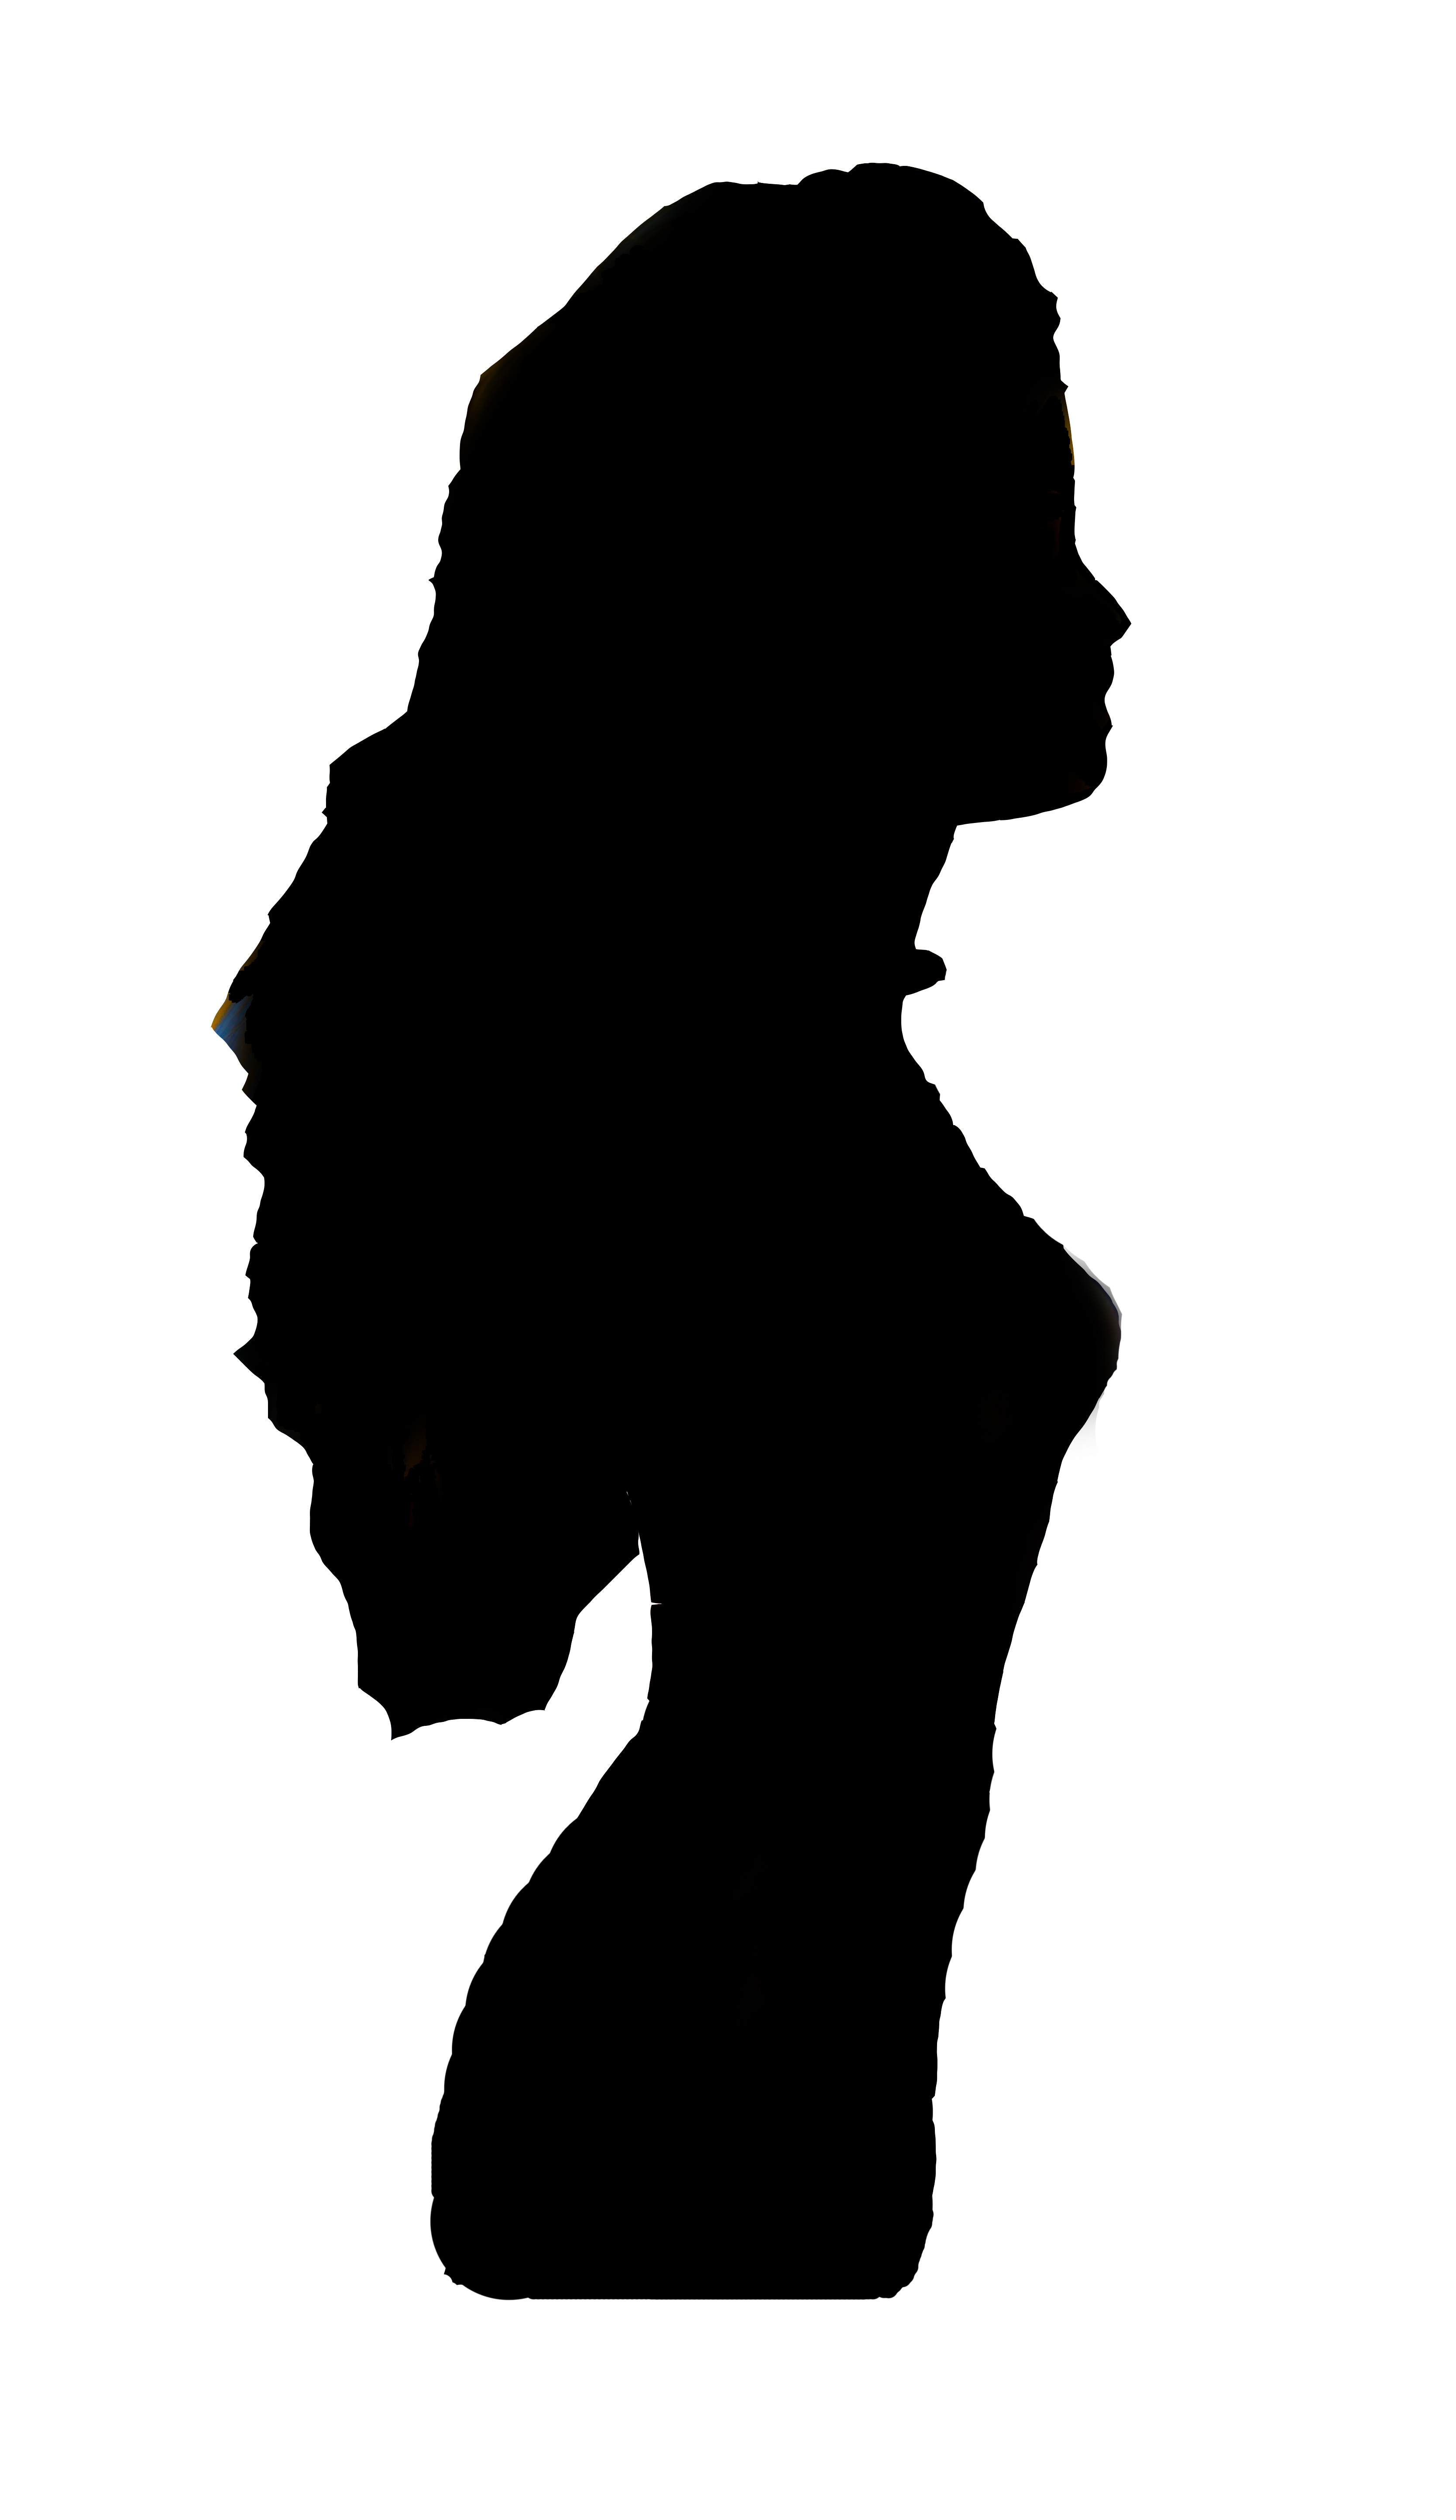 Barbie Head Silhouette at GetDrawings.com | Free for personal use